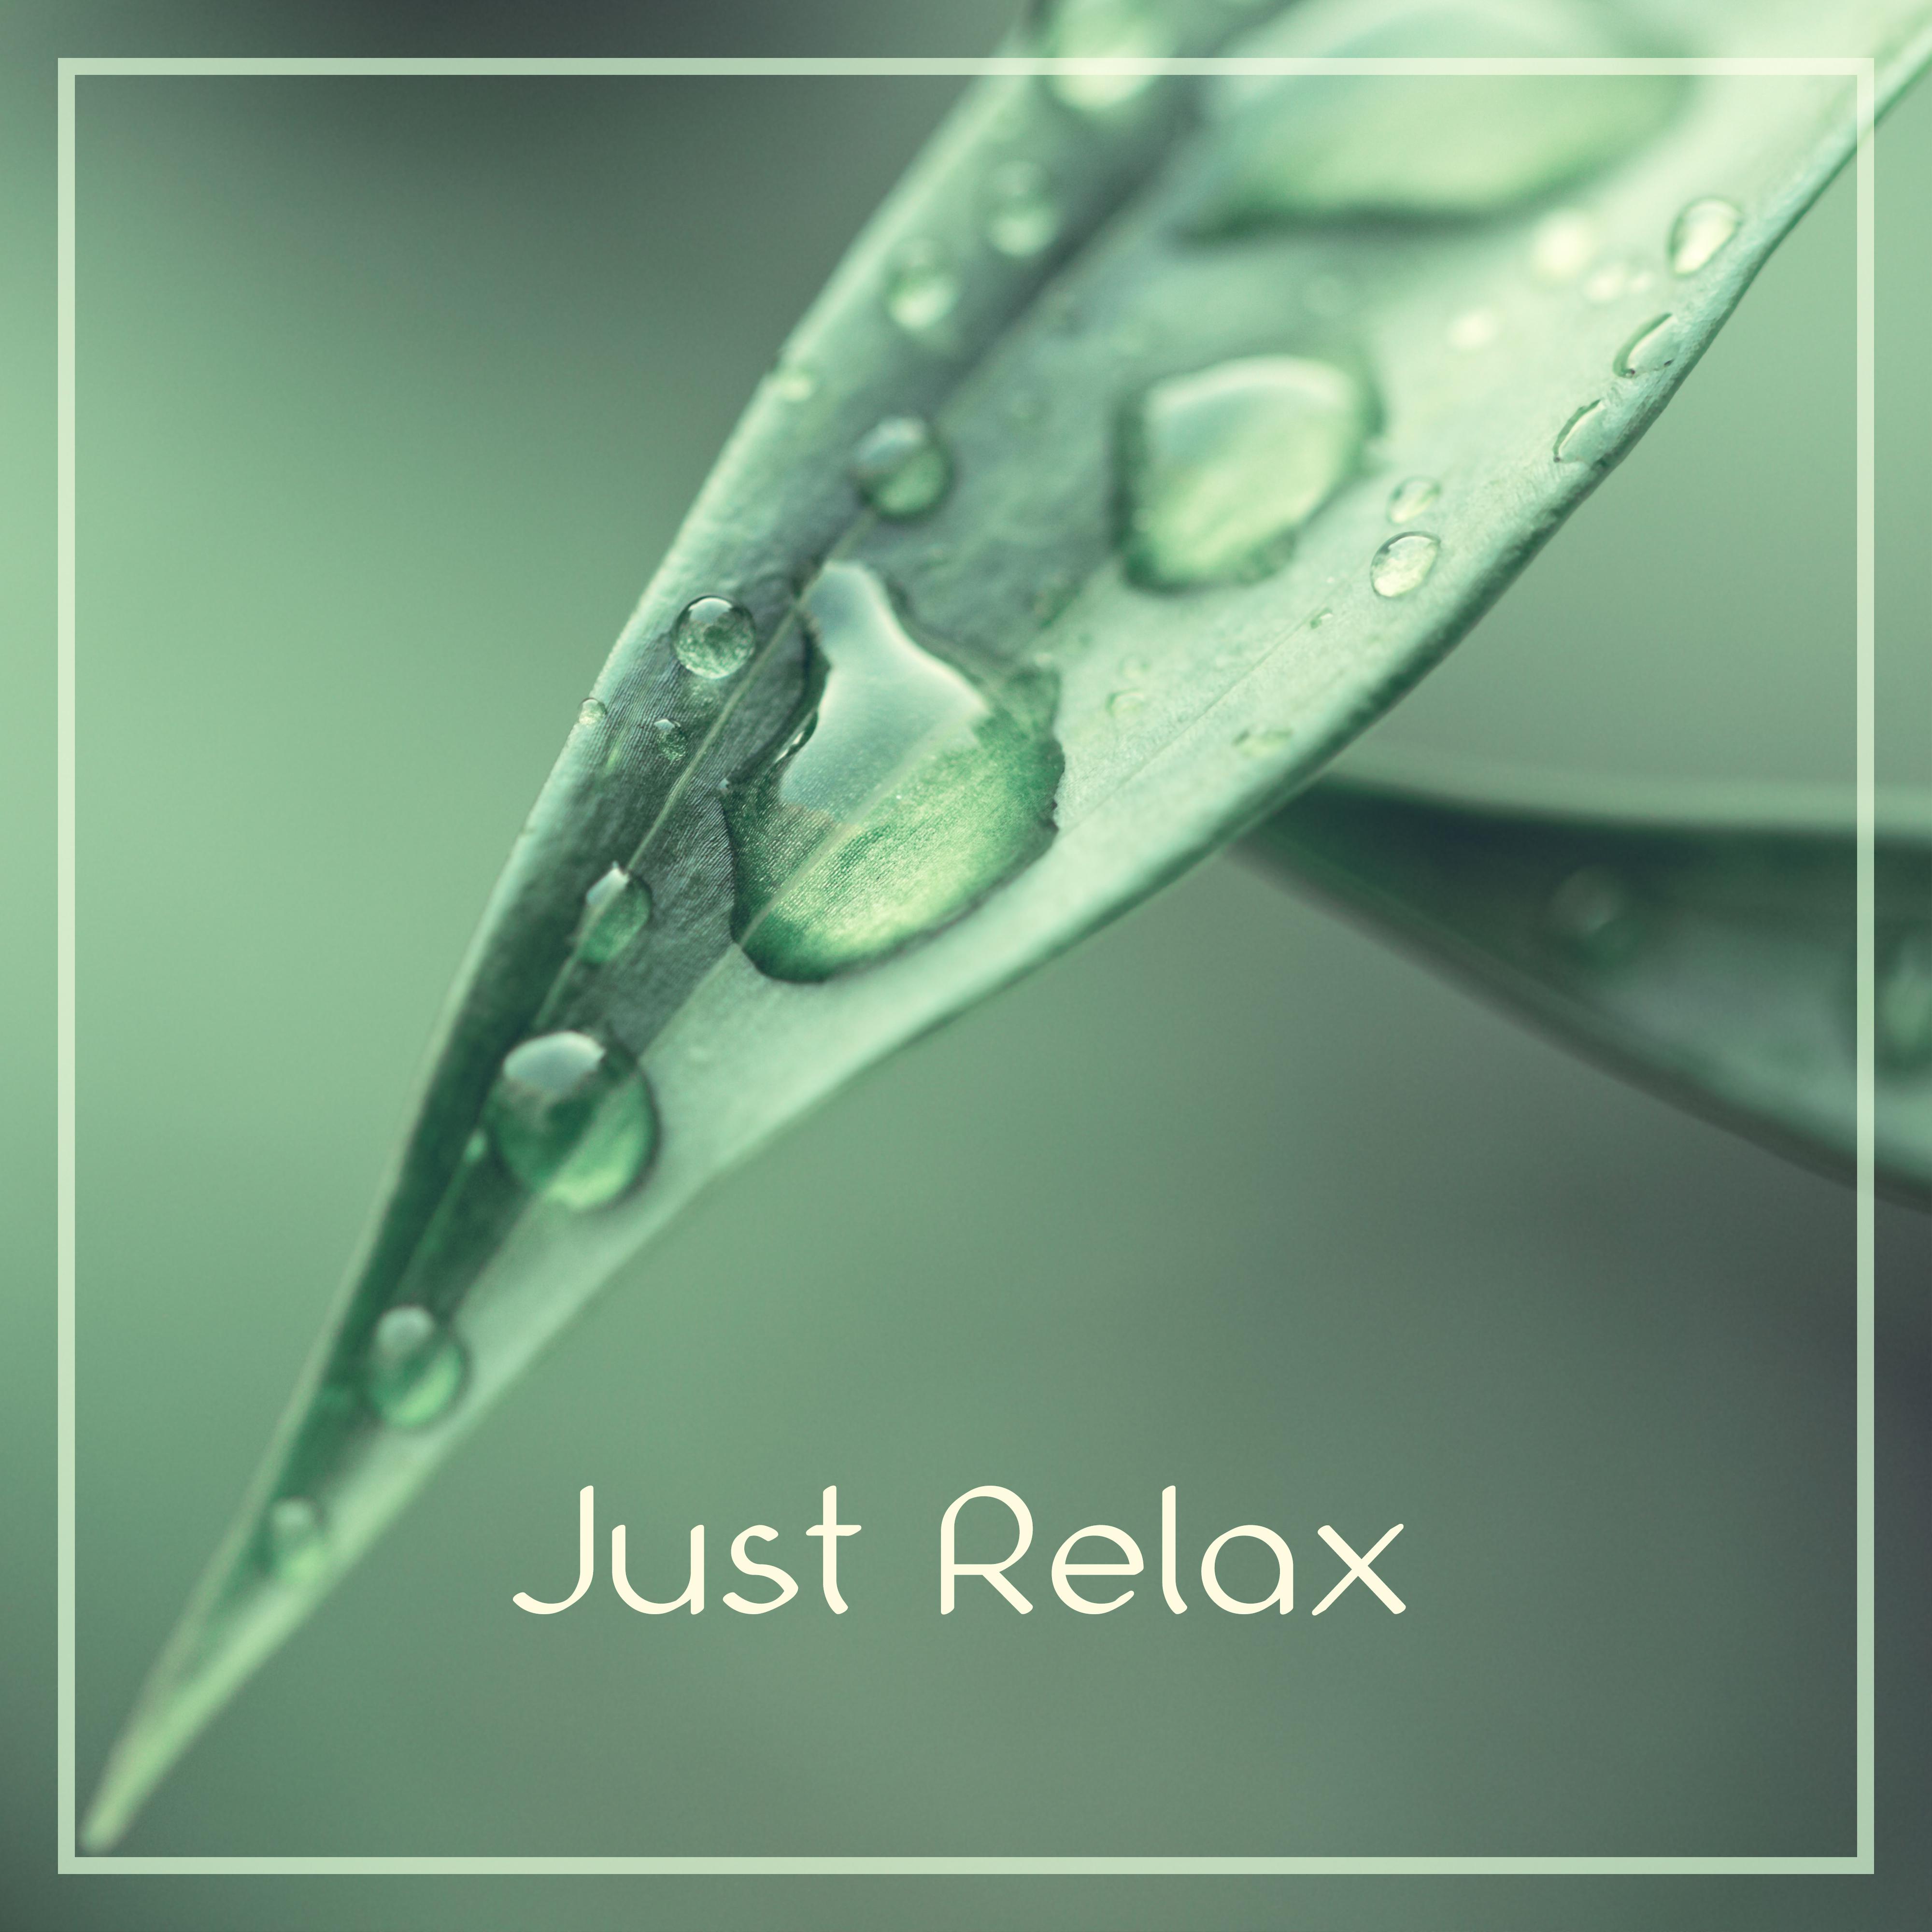 Just Relax – New Age Music, Pure Relaxation, Rest, Deep Sounds of Nature, Instrumental